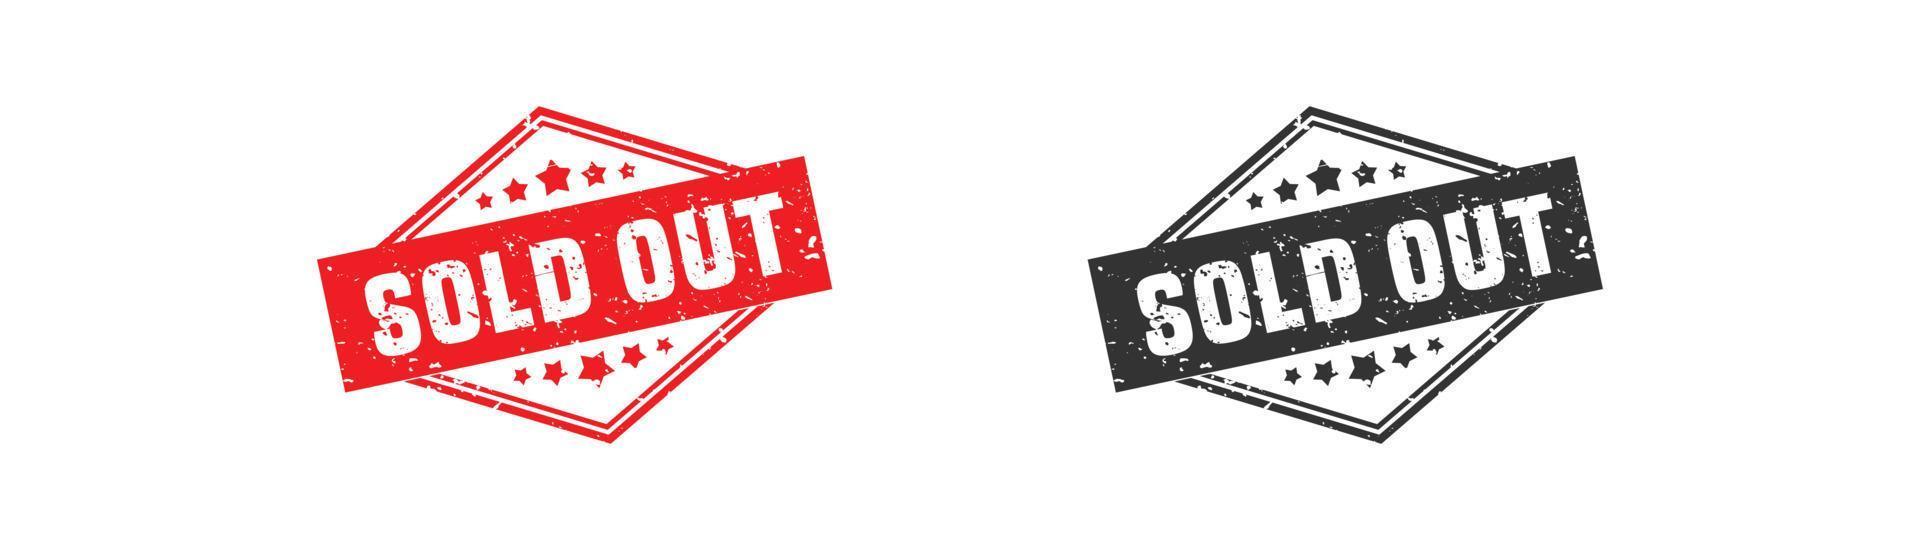 Sold out stamp rubber with grunge style on white background. vector